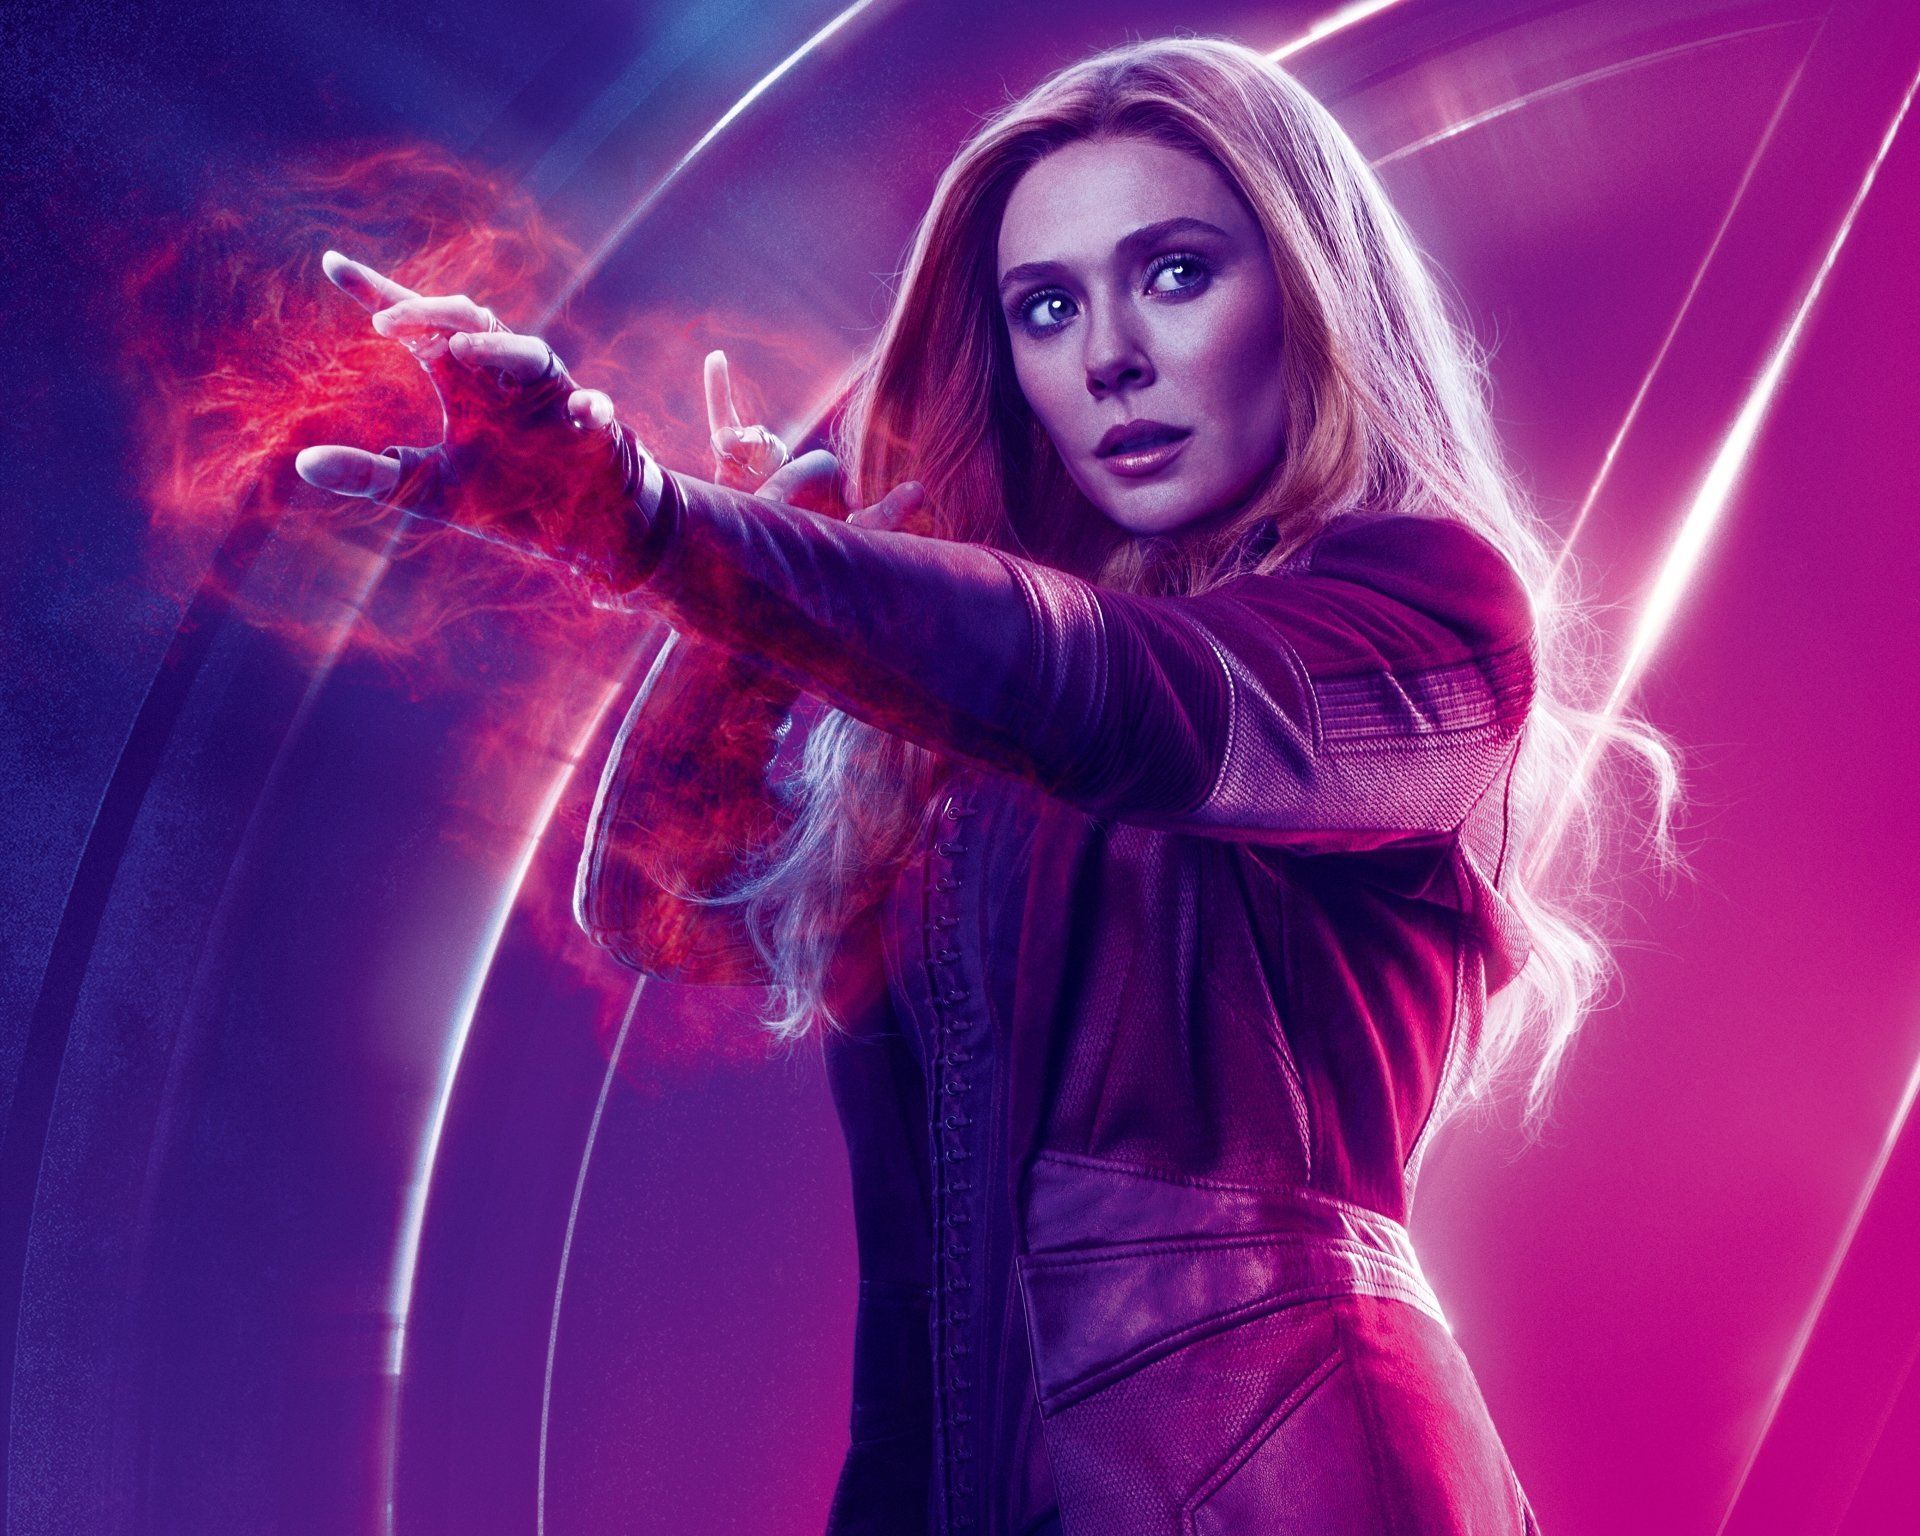 Scarlet Witch (Avengers Infinity War) 8k Ultra HD Wallpaper and Background Imagex6297.. Scarlet witch avengers, Scarlet witch marvel, Marvel avengers